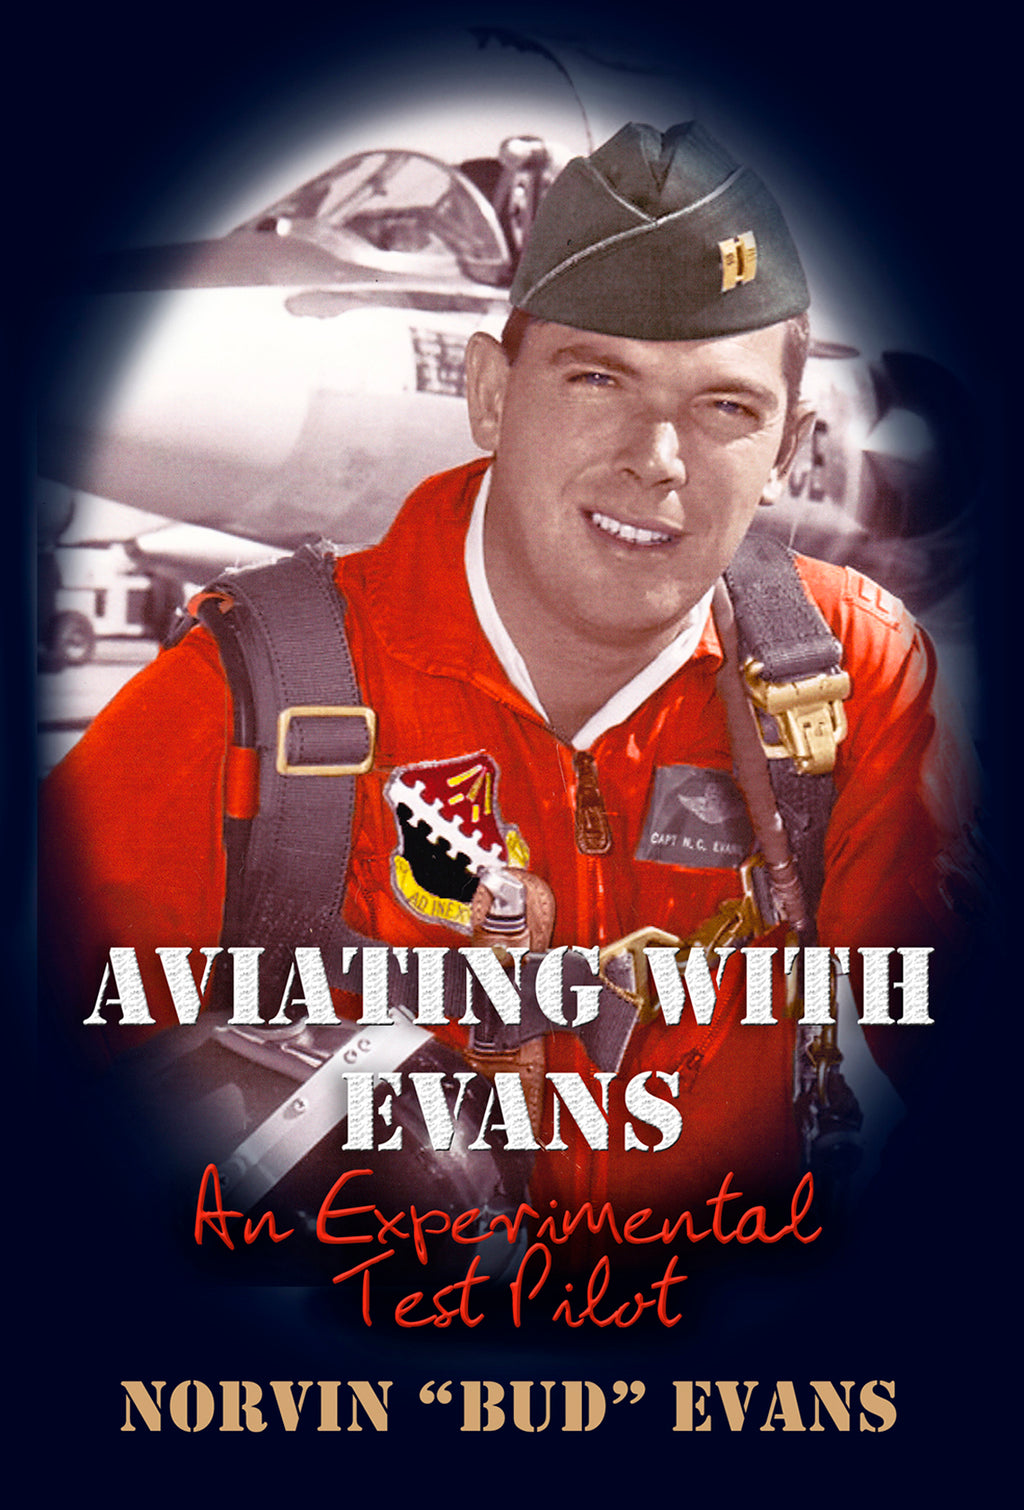 Aviating With Evans, Norvin Bud Evans - Blue Note Publications, Inc